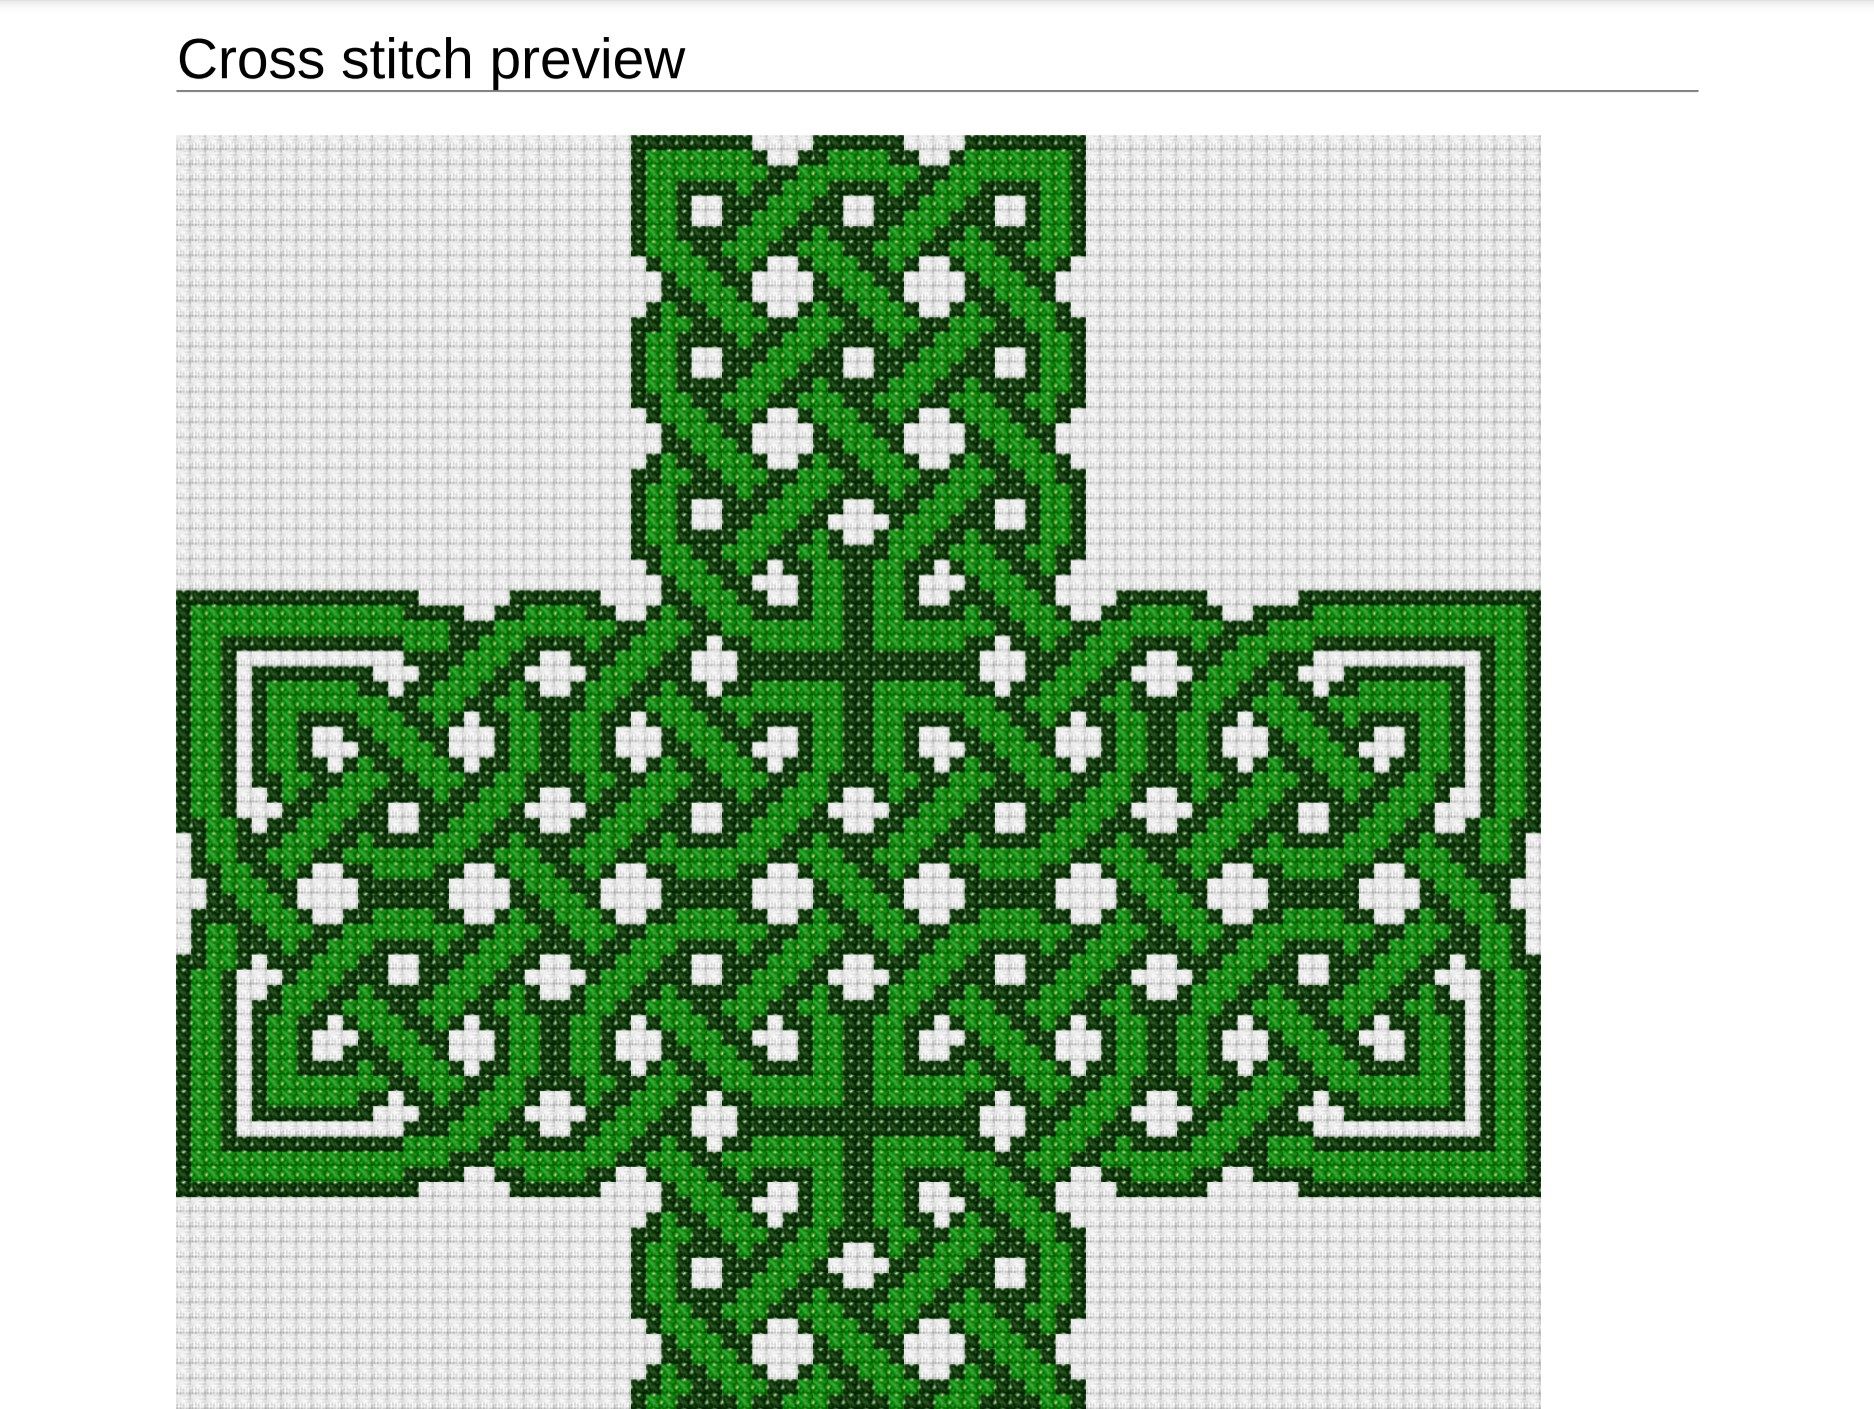 Preview the knot as a cross stitch